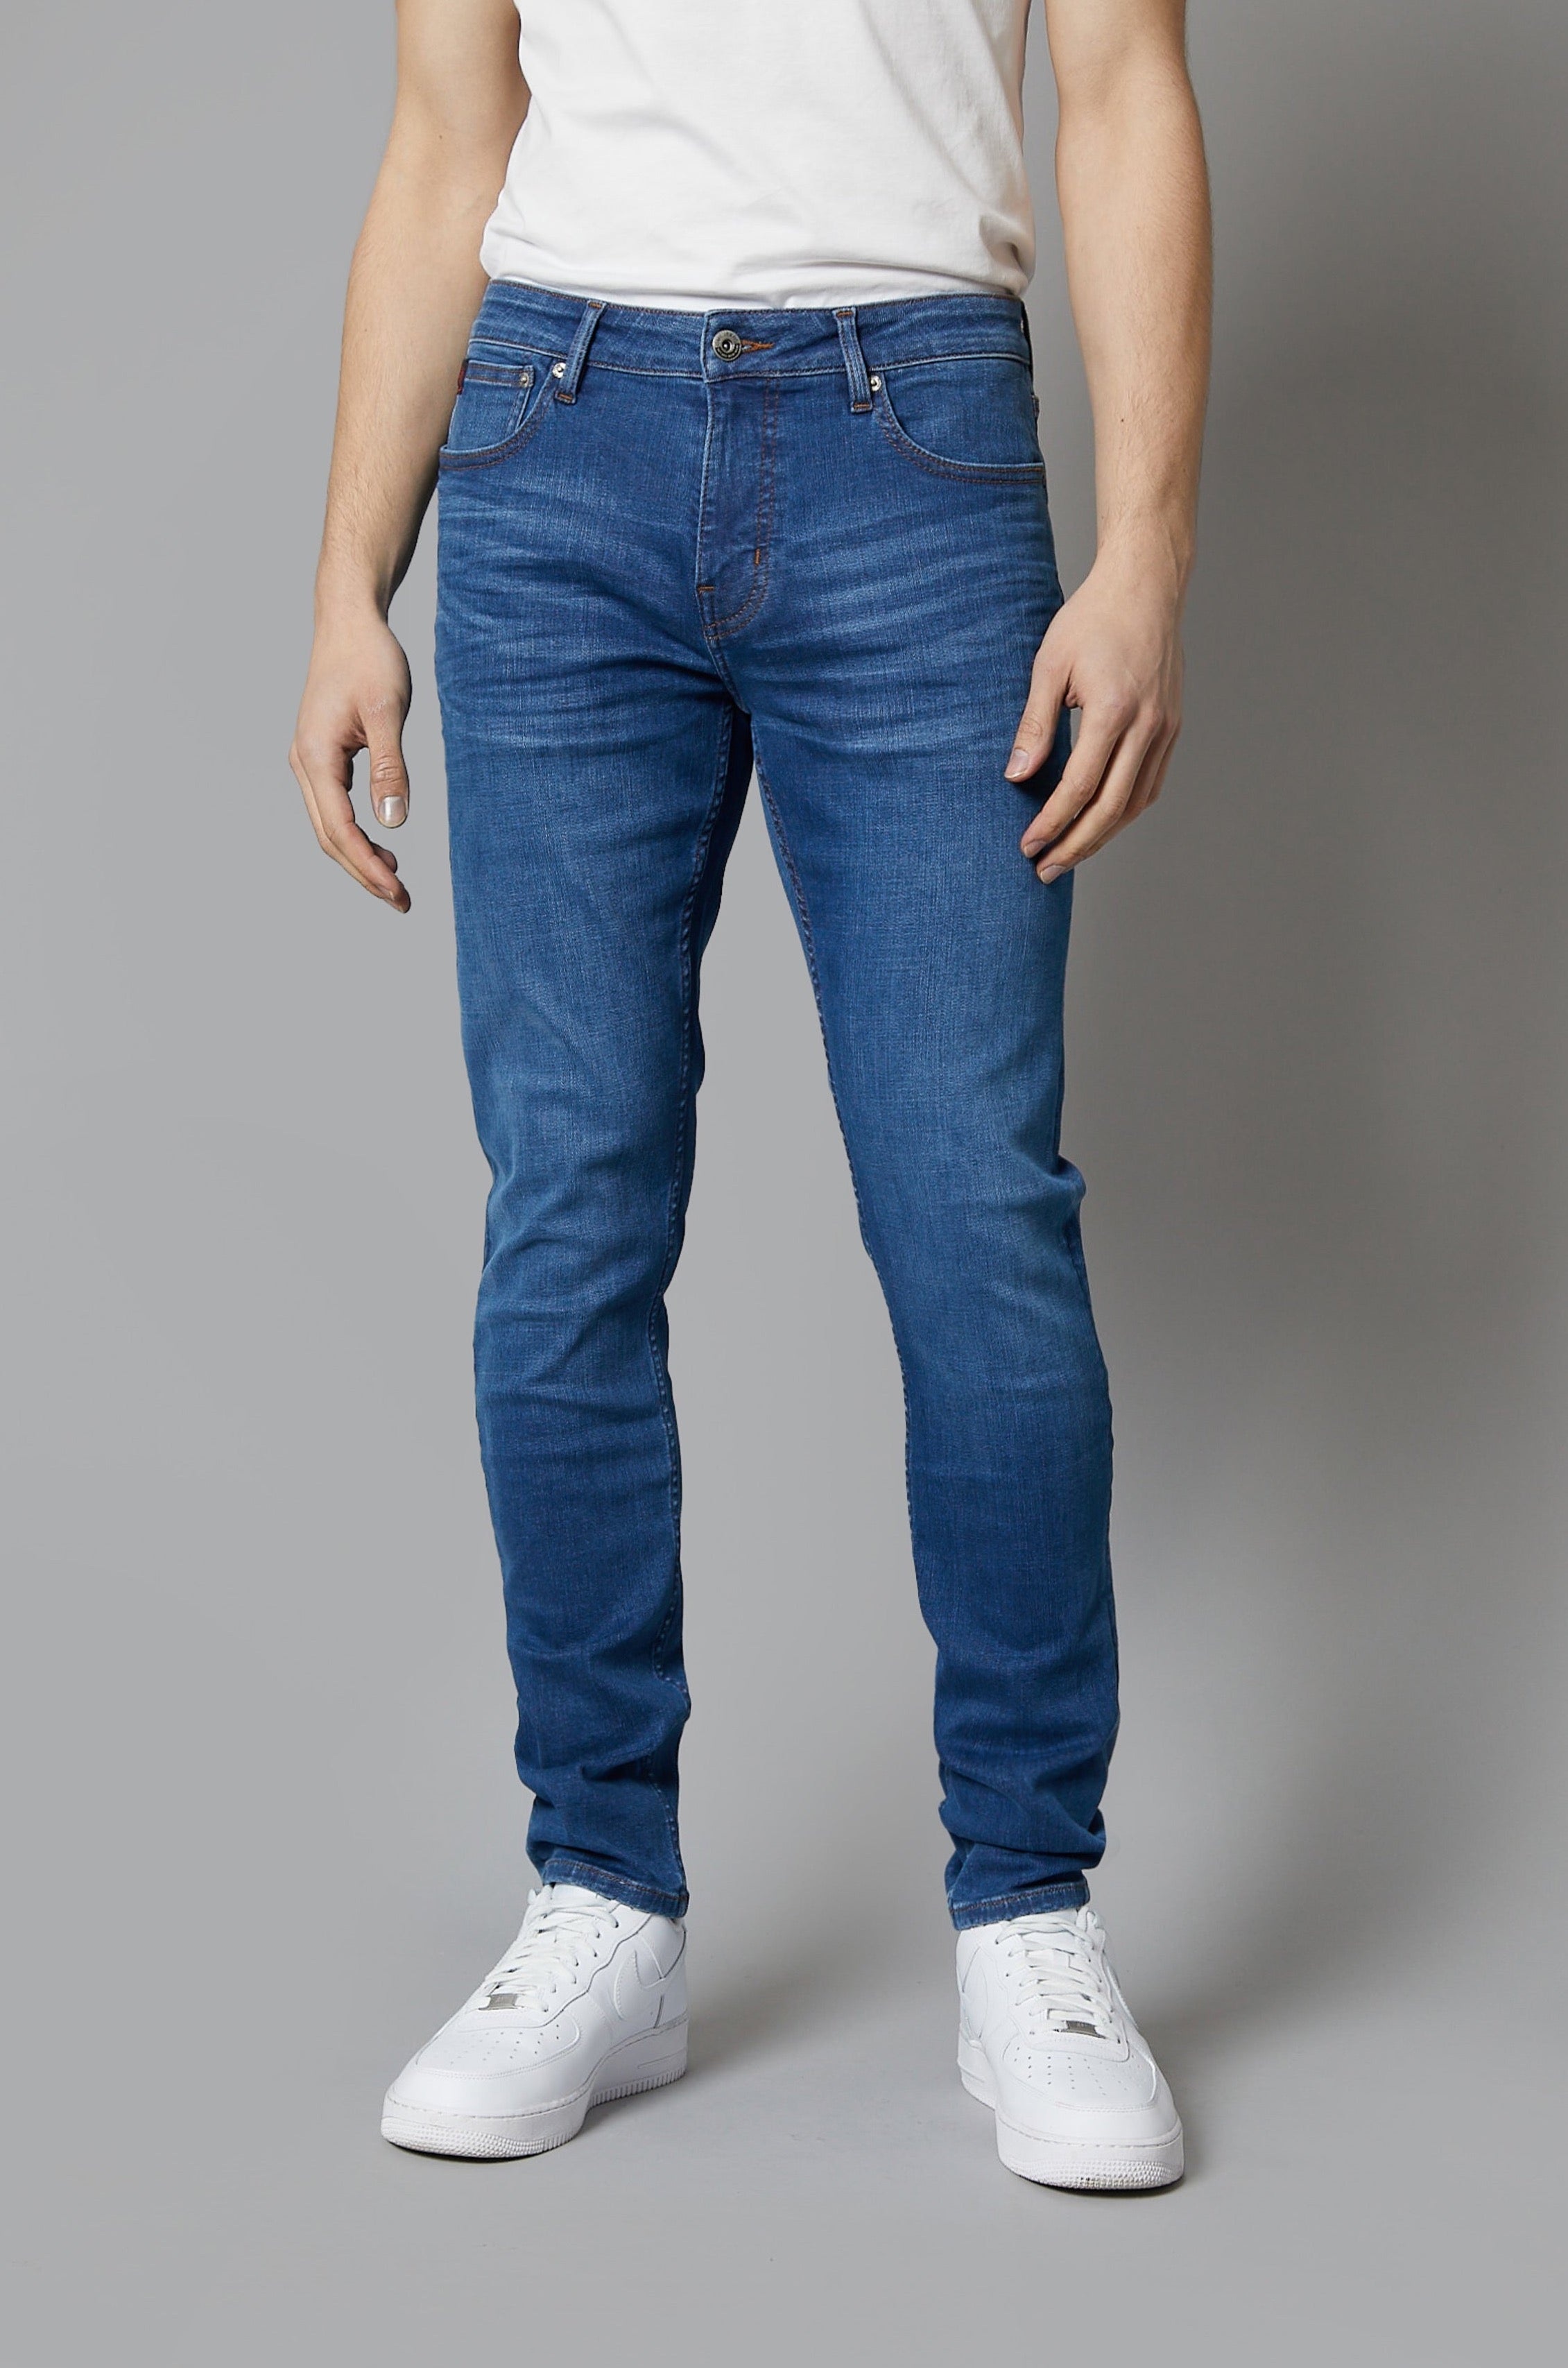 FLORIDA Tapered Jeans In Mid | DML Jeans